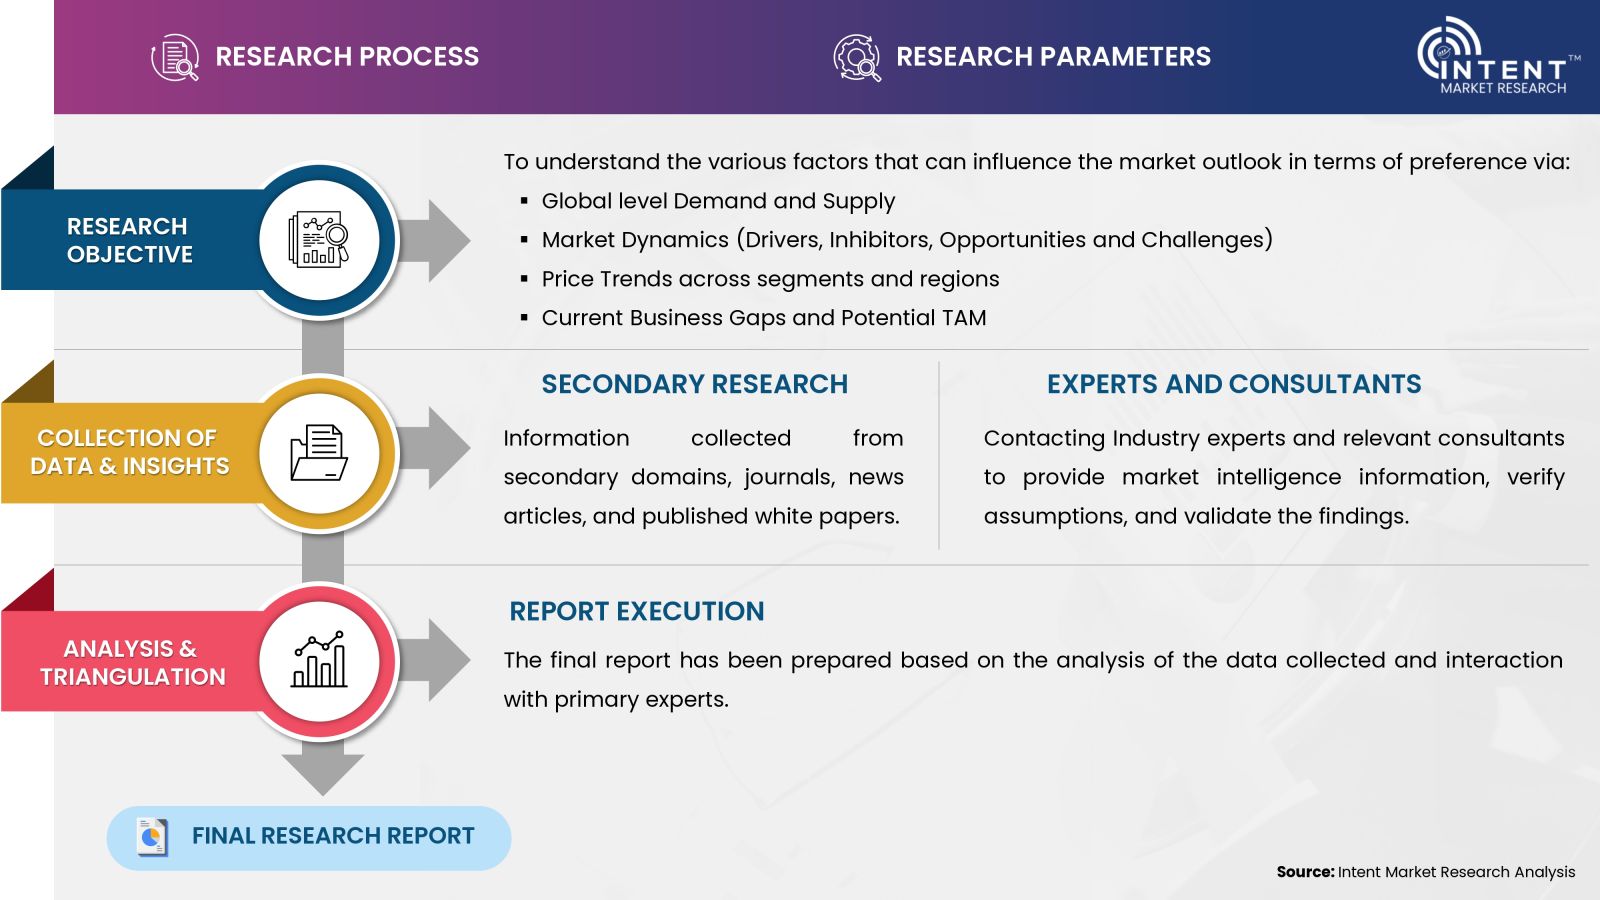 Laboratory Proficiency Testing Market - Research Approach